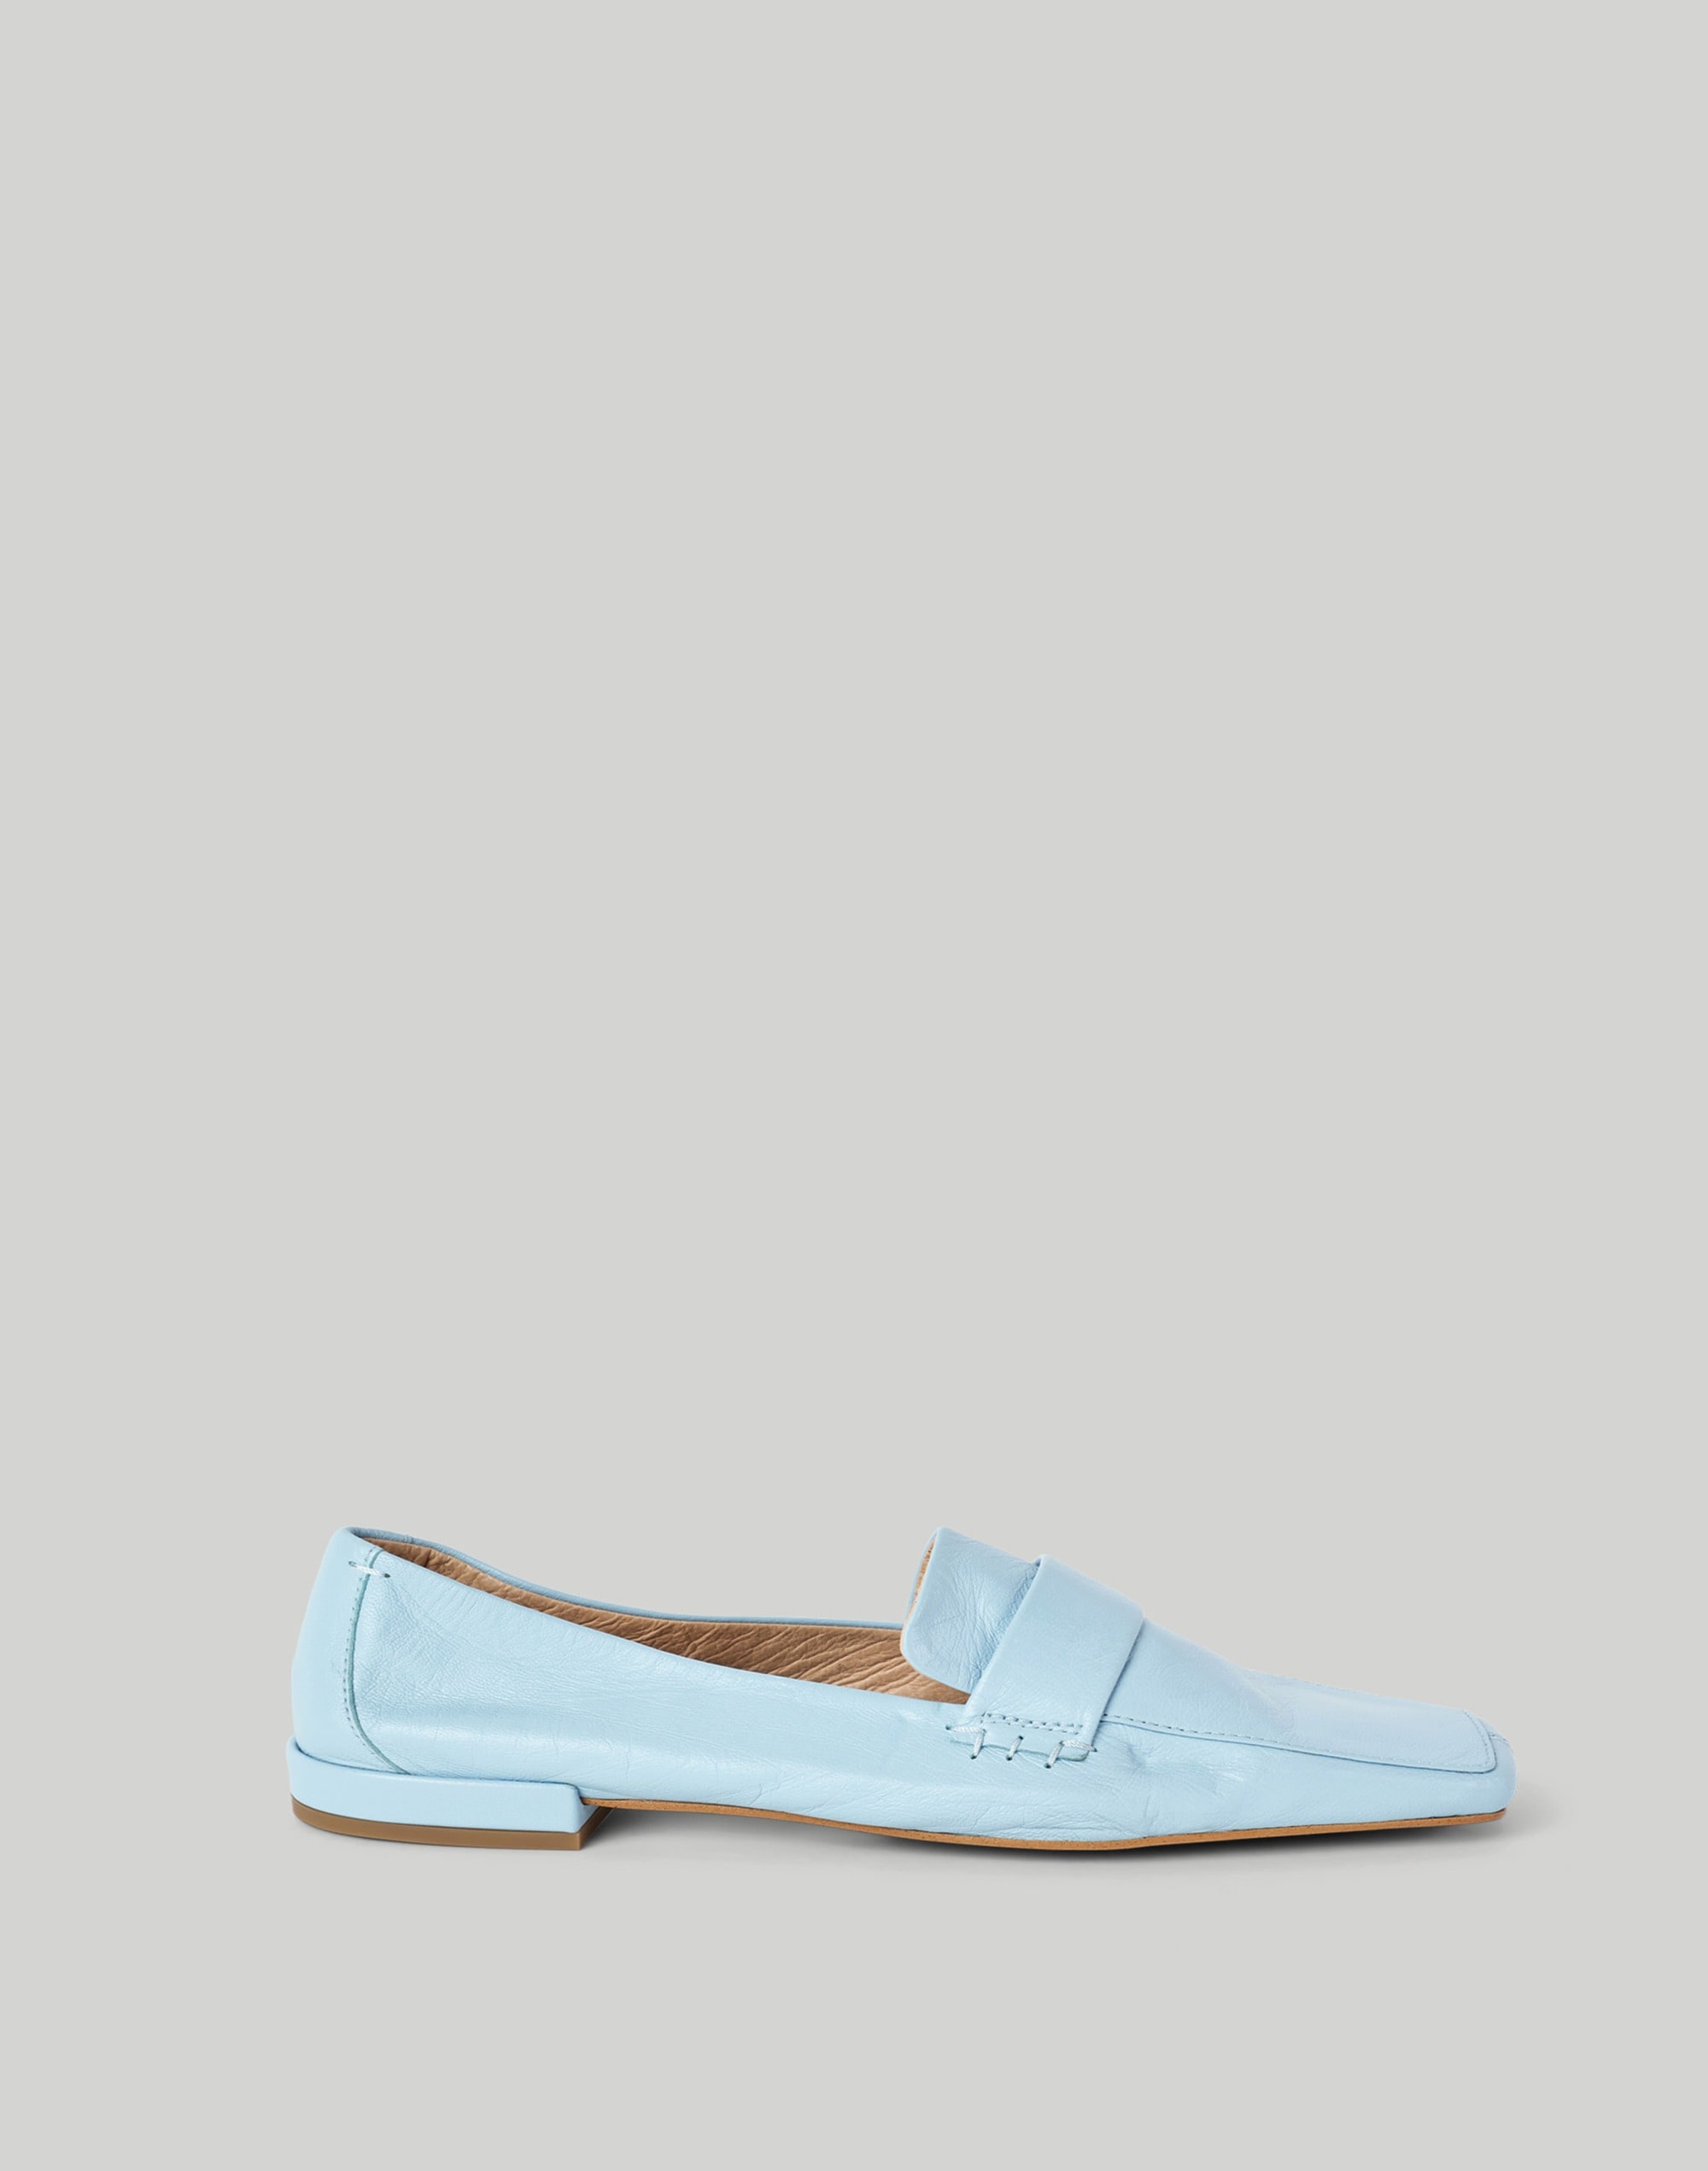 Intentionally Blank Pinky Loafer